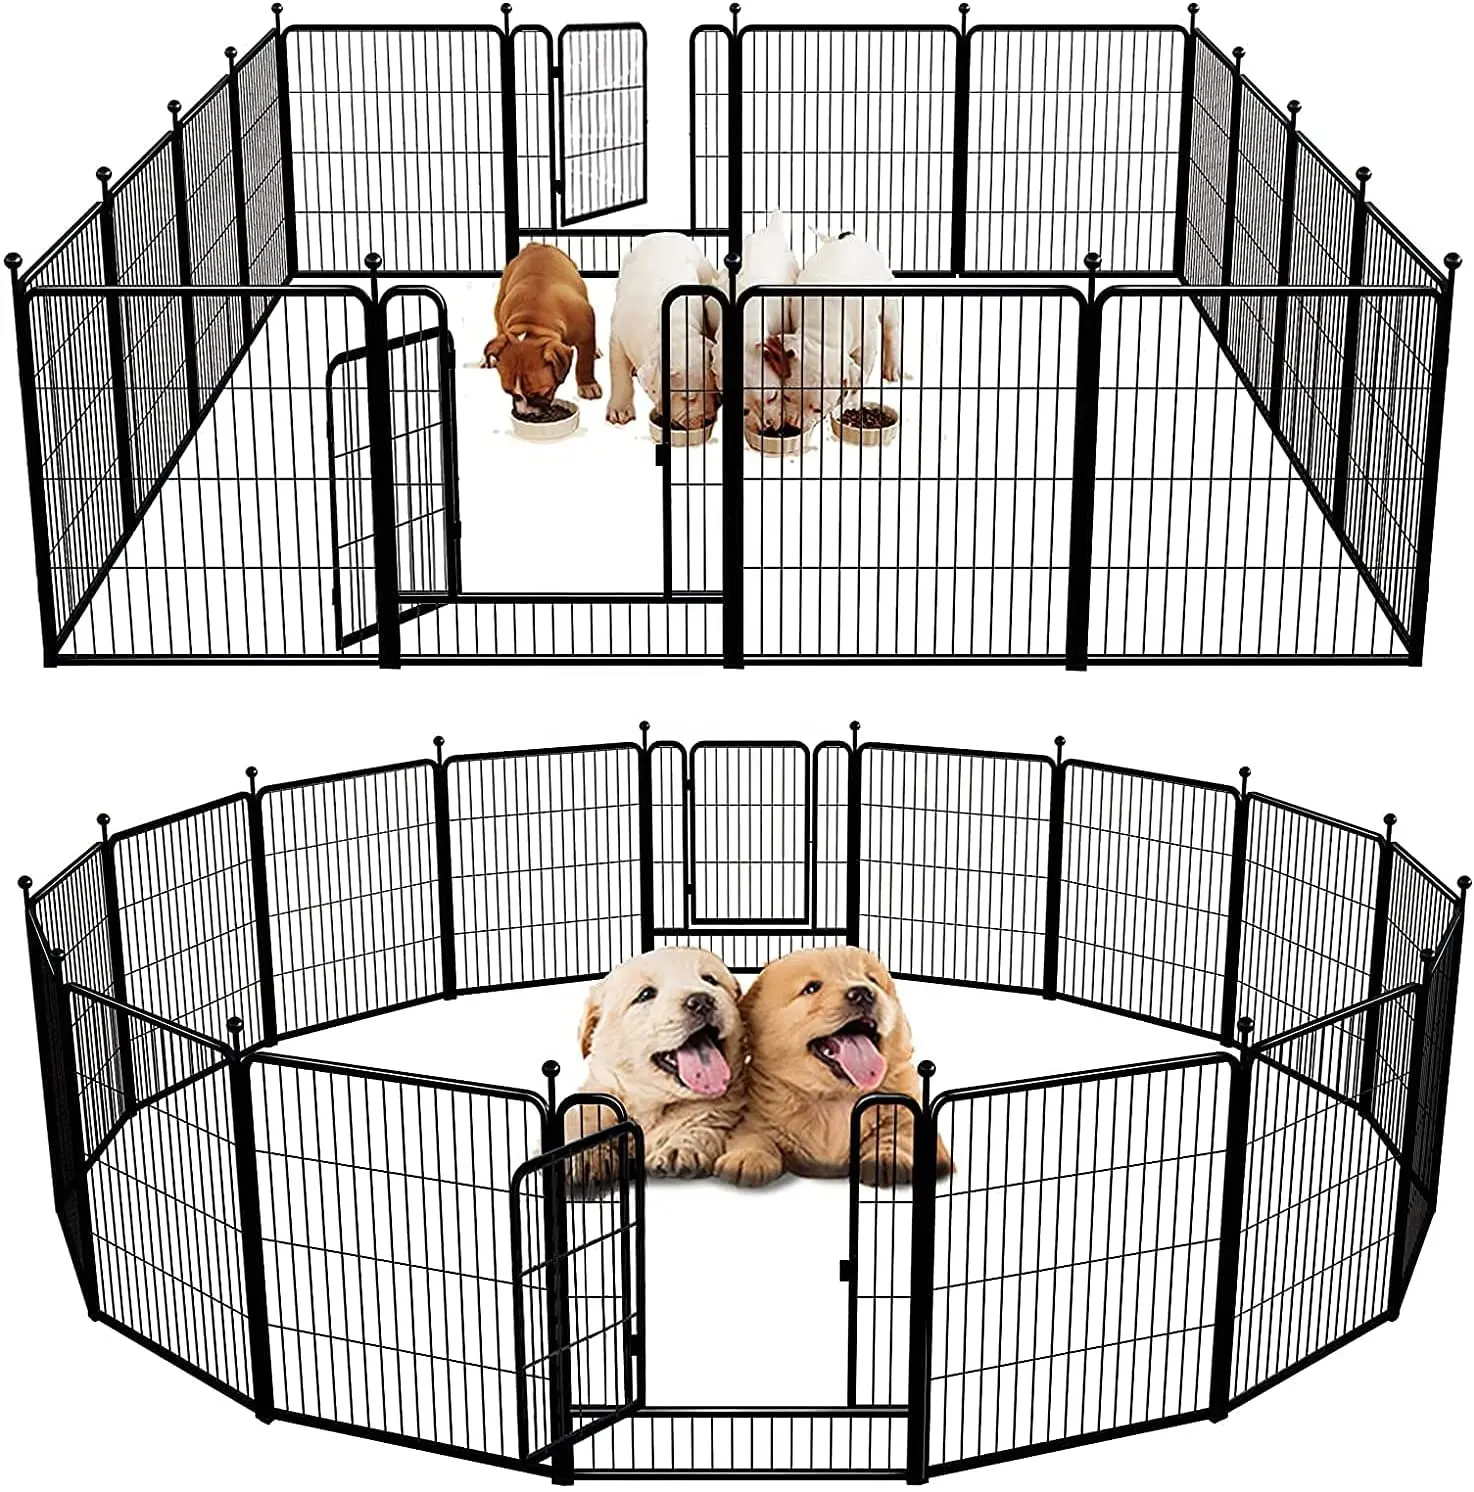 Outdoor Dog Playpen, Dog Pen Fences 16 Panels 32Inch Height Puppy Pet Playpen for Small/Medium Dogs